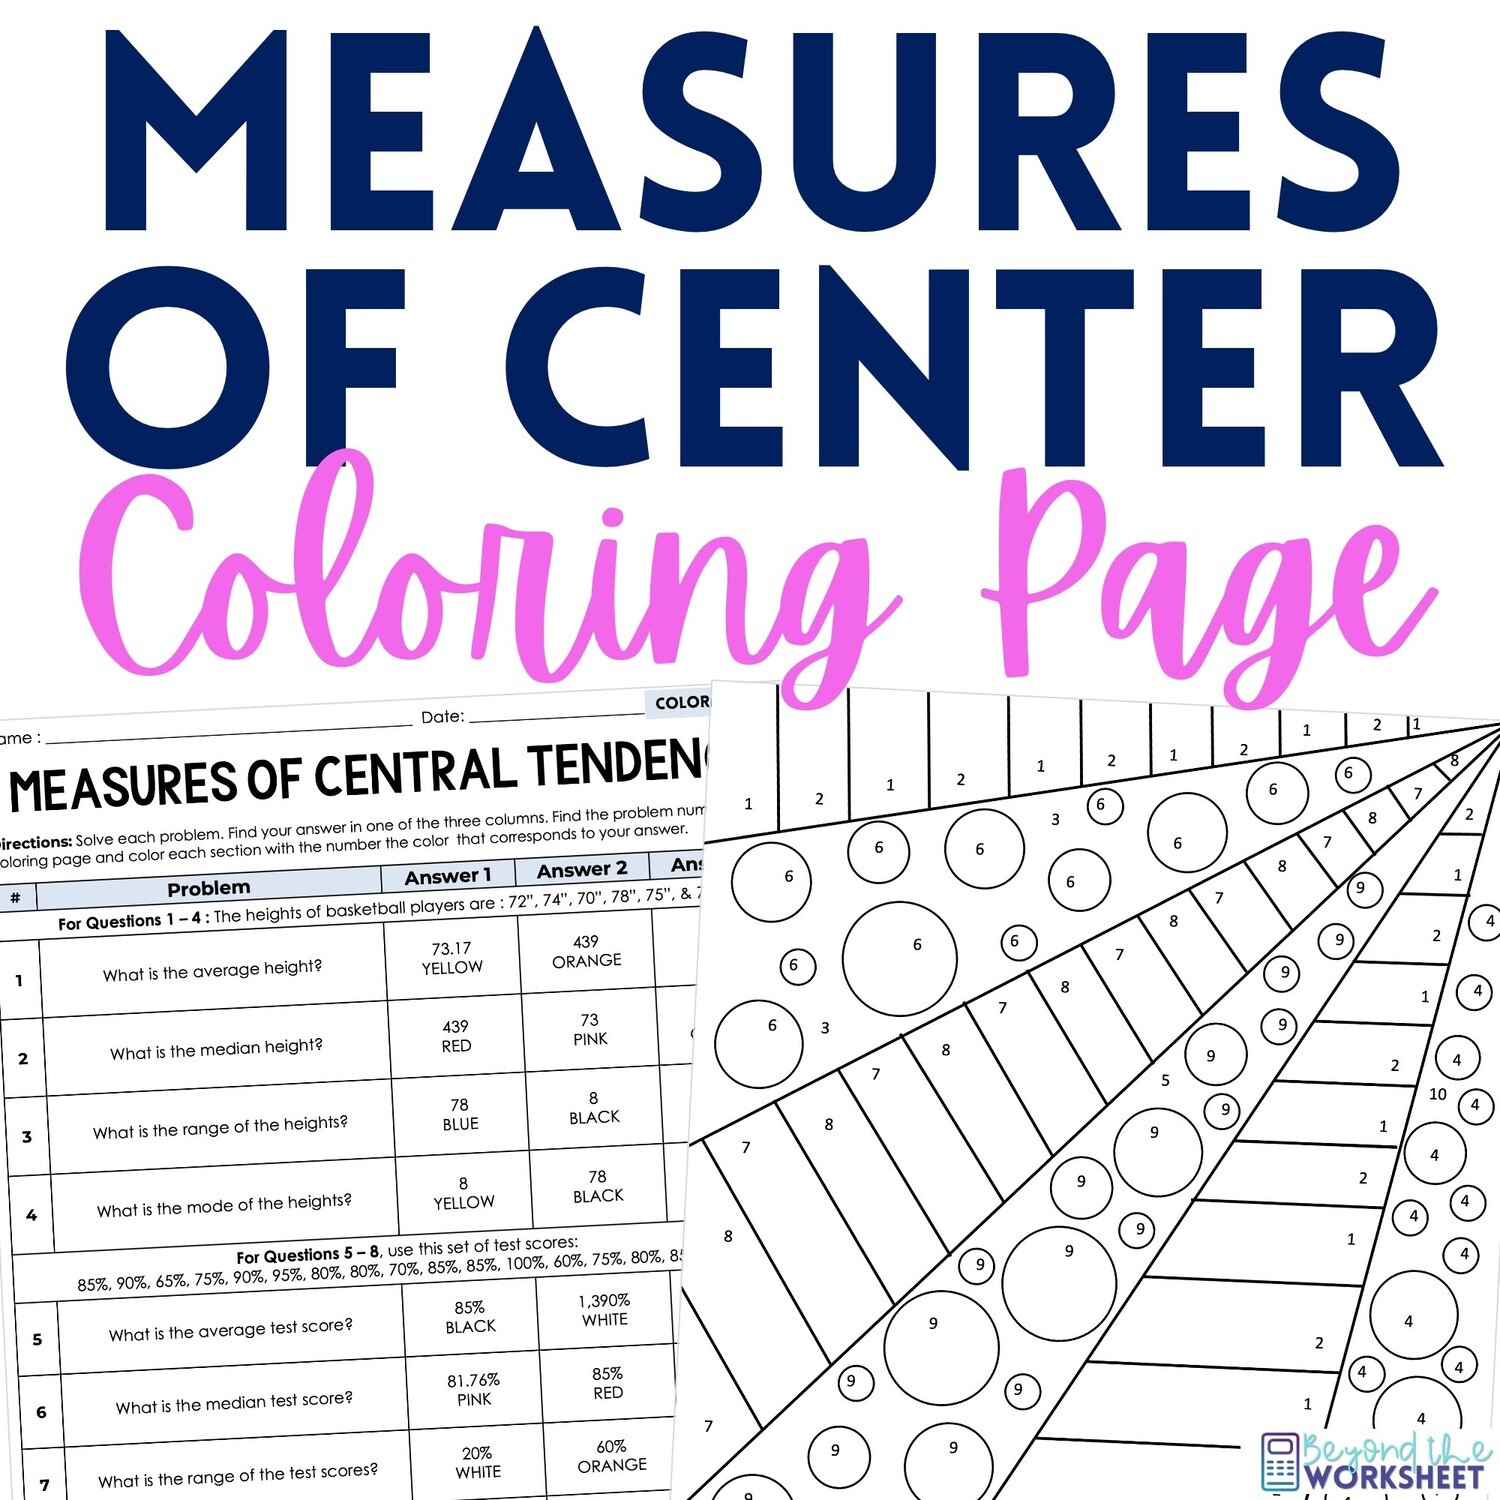 Measures of Central Tendency Coloring Activity